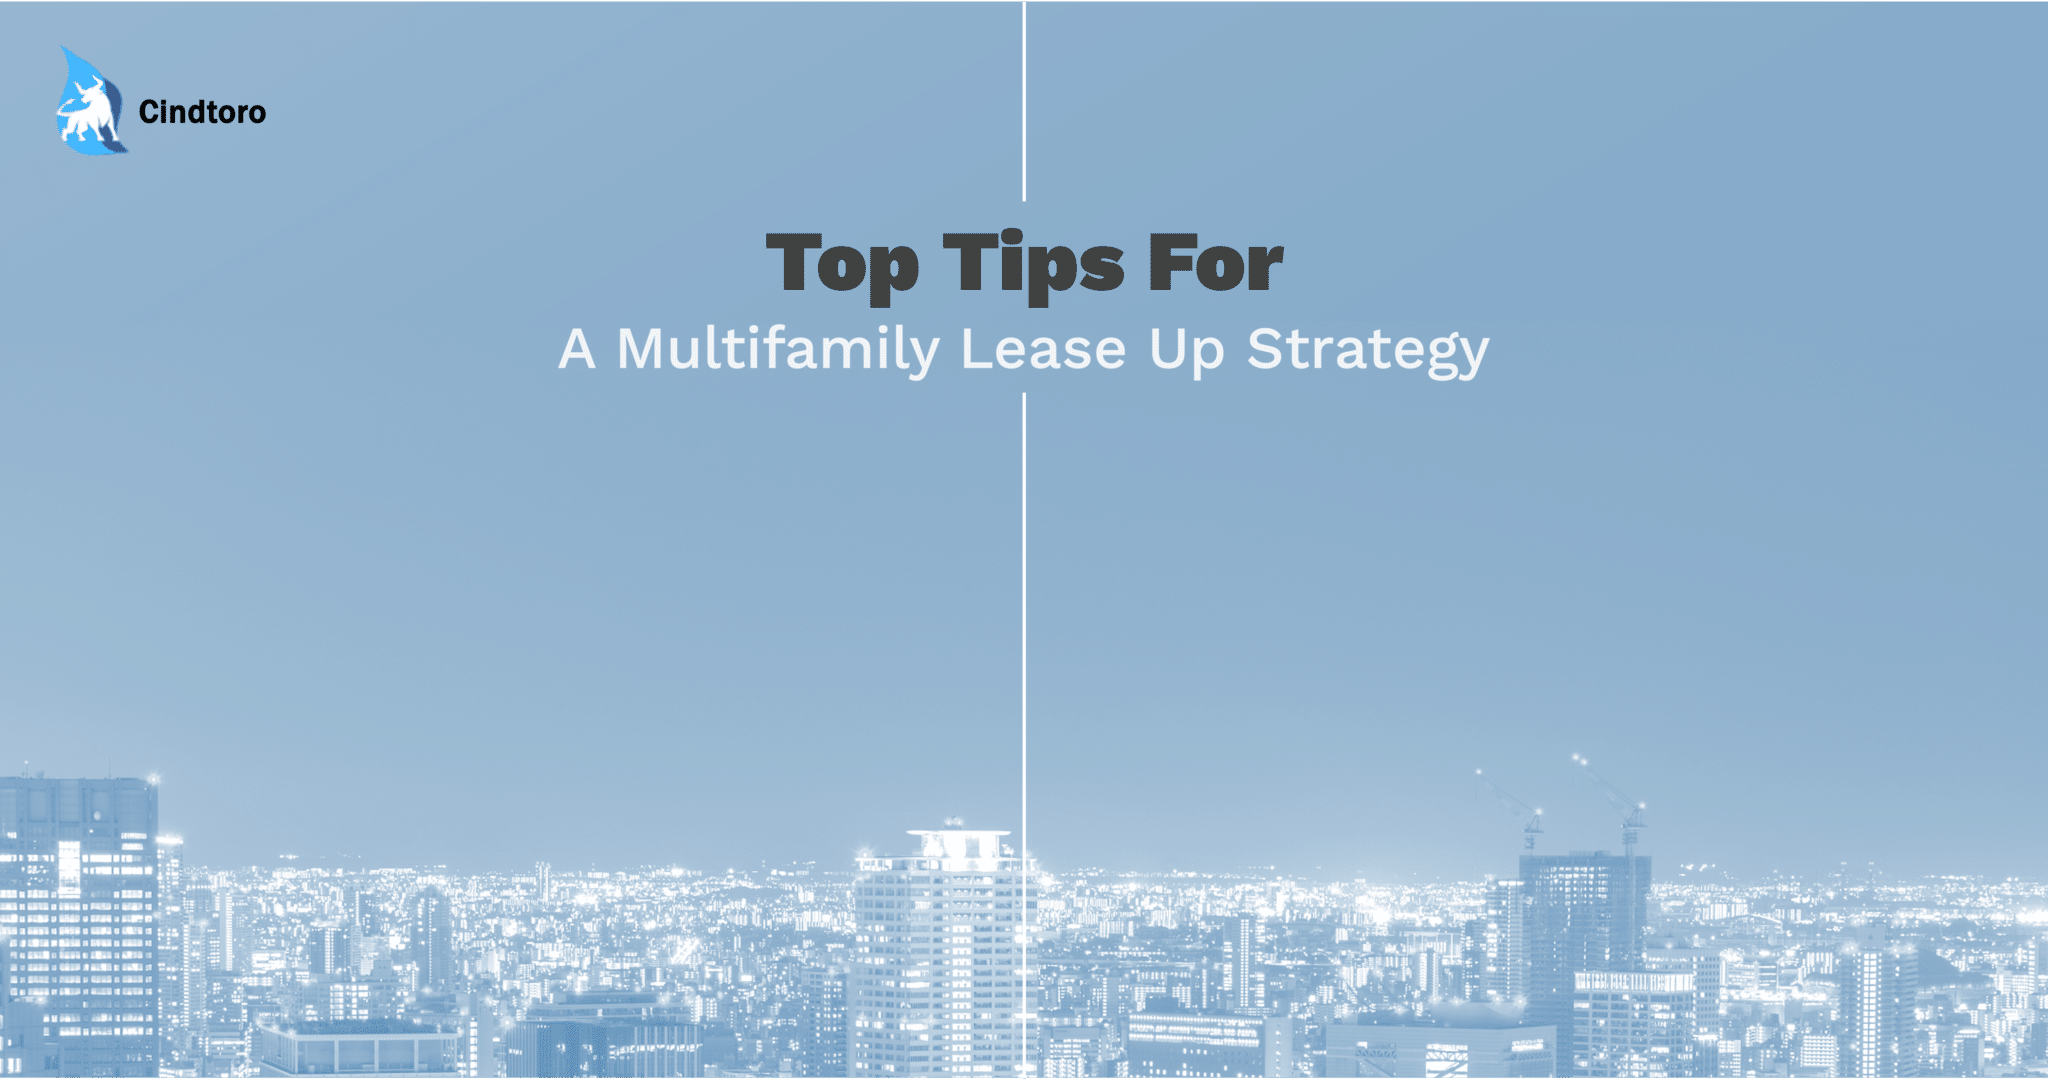 Top Tips For A Multifamily Lease Up Strategy